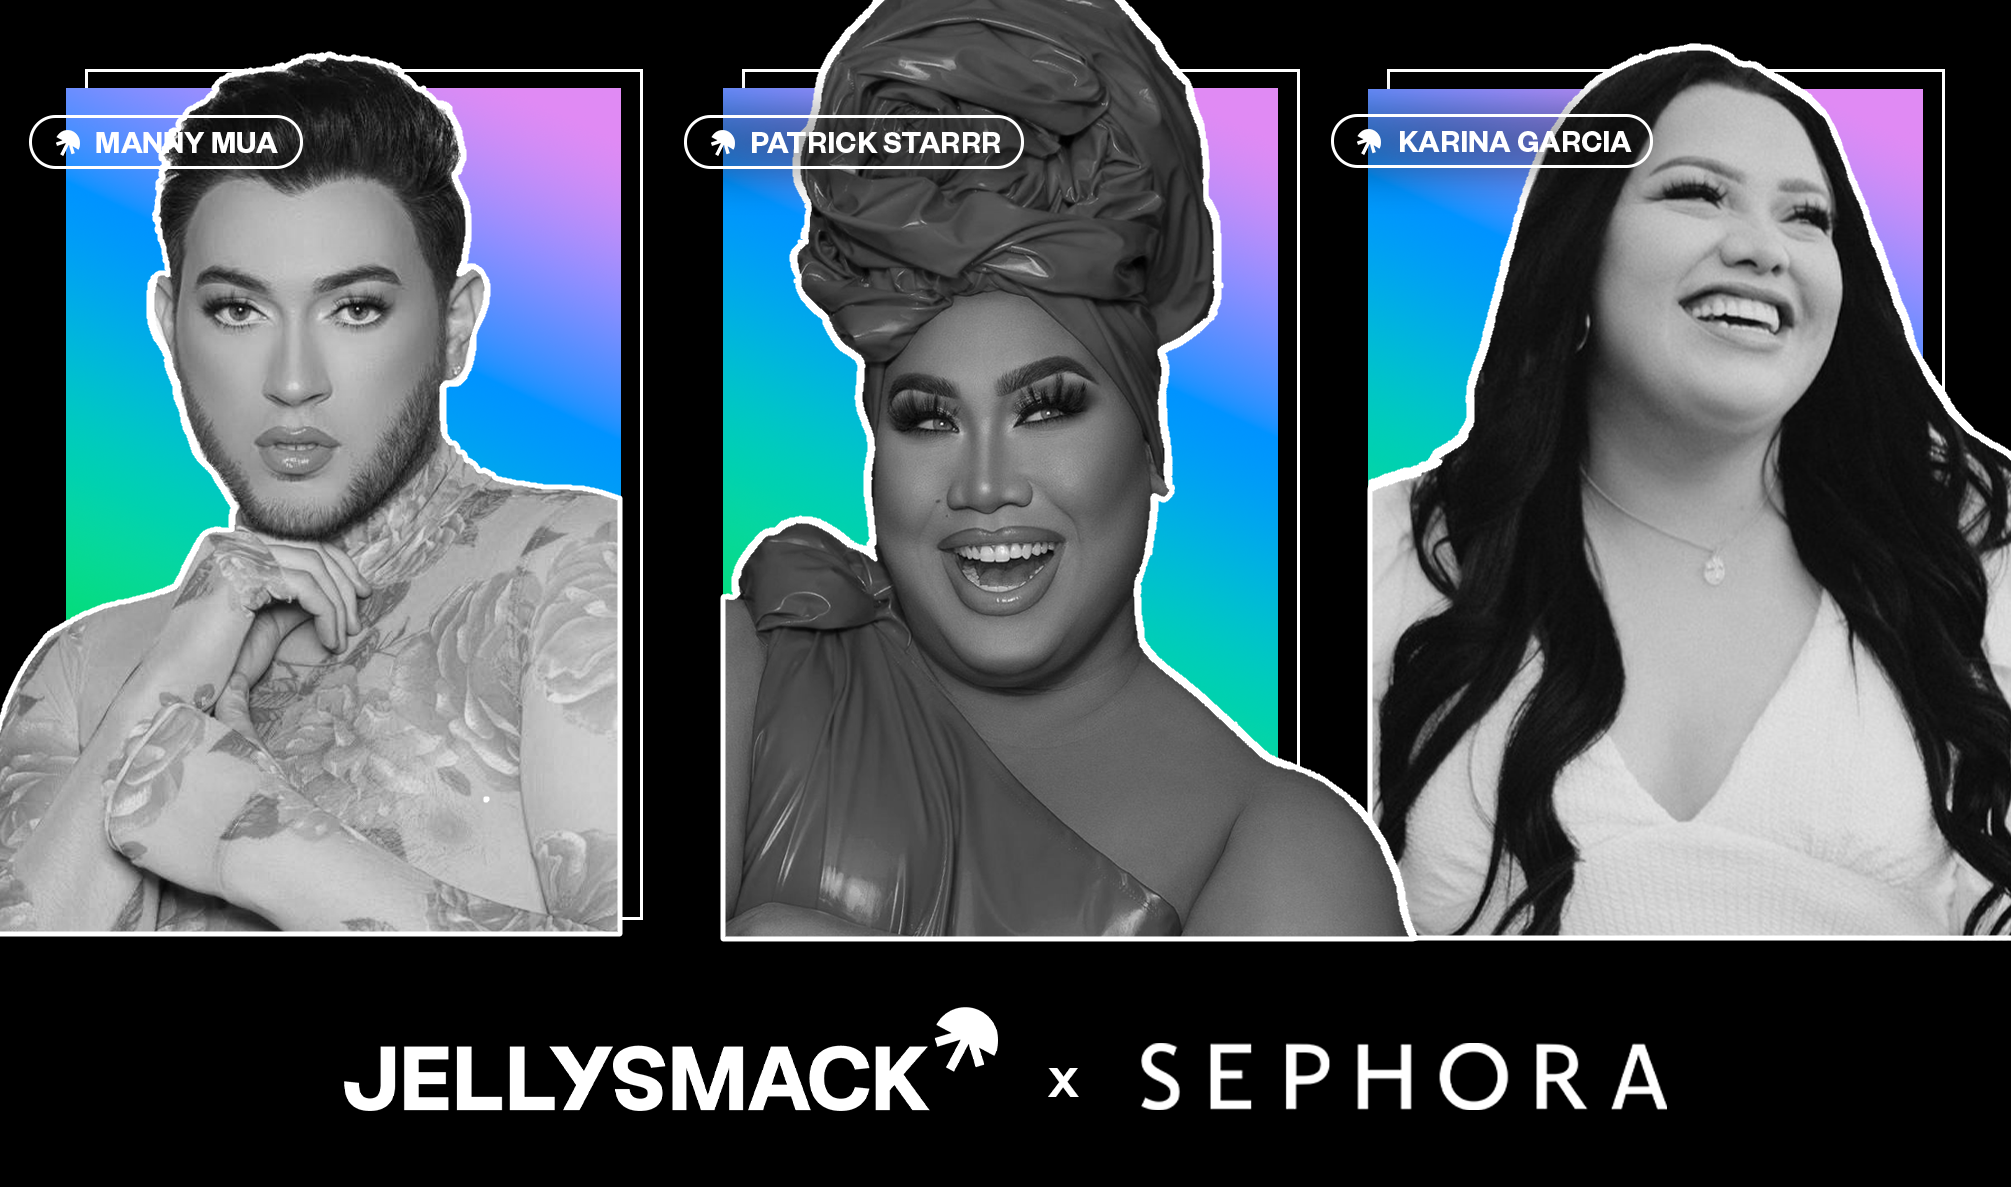 Creators MannyMua, Patrick Starrr, and Karina Garcia in black and white on gradient boxes placed on black background with Jellysmack and Sephora logos